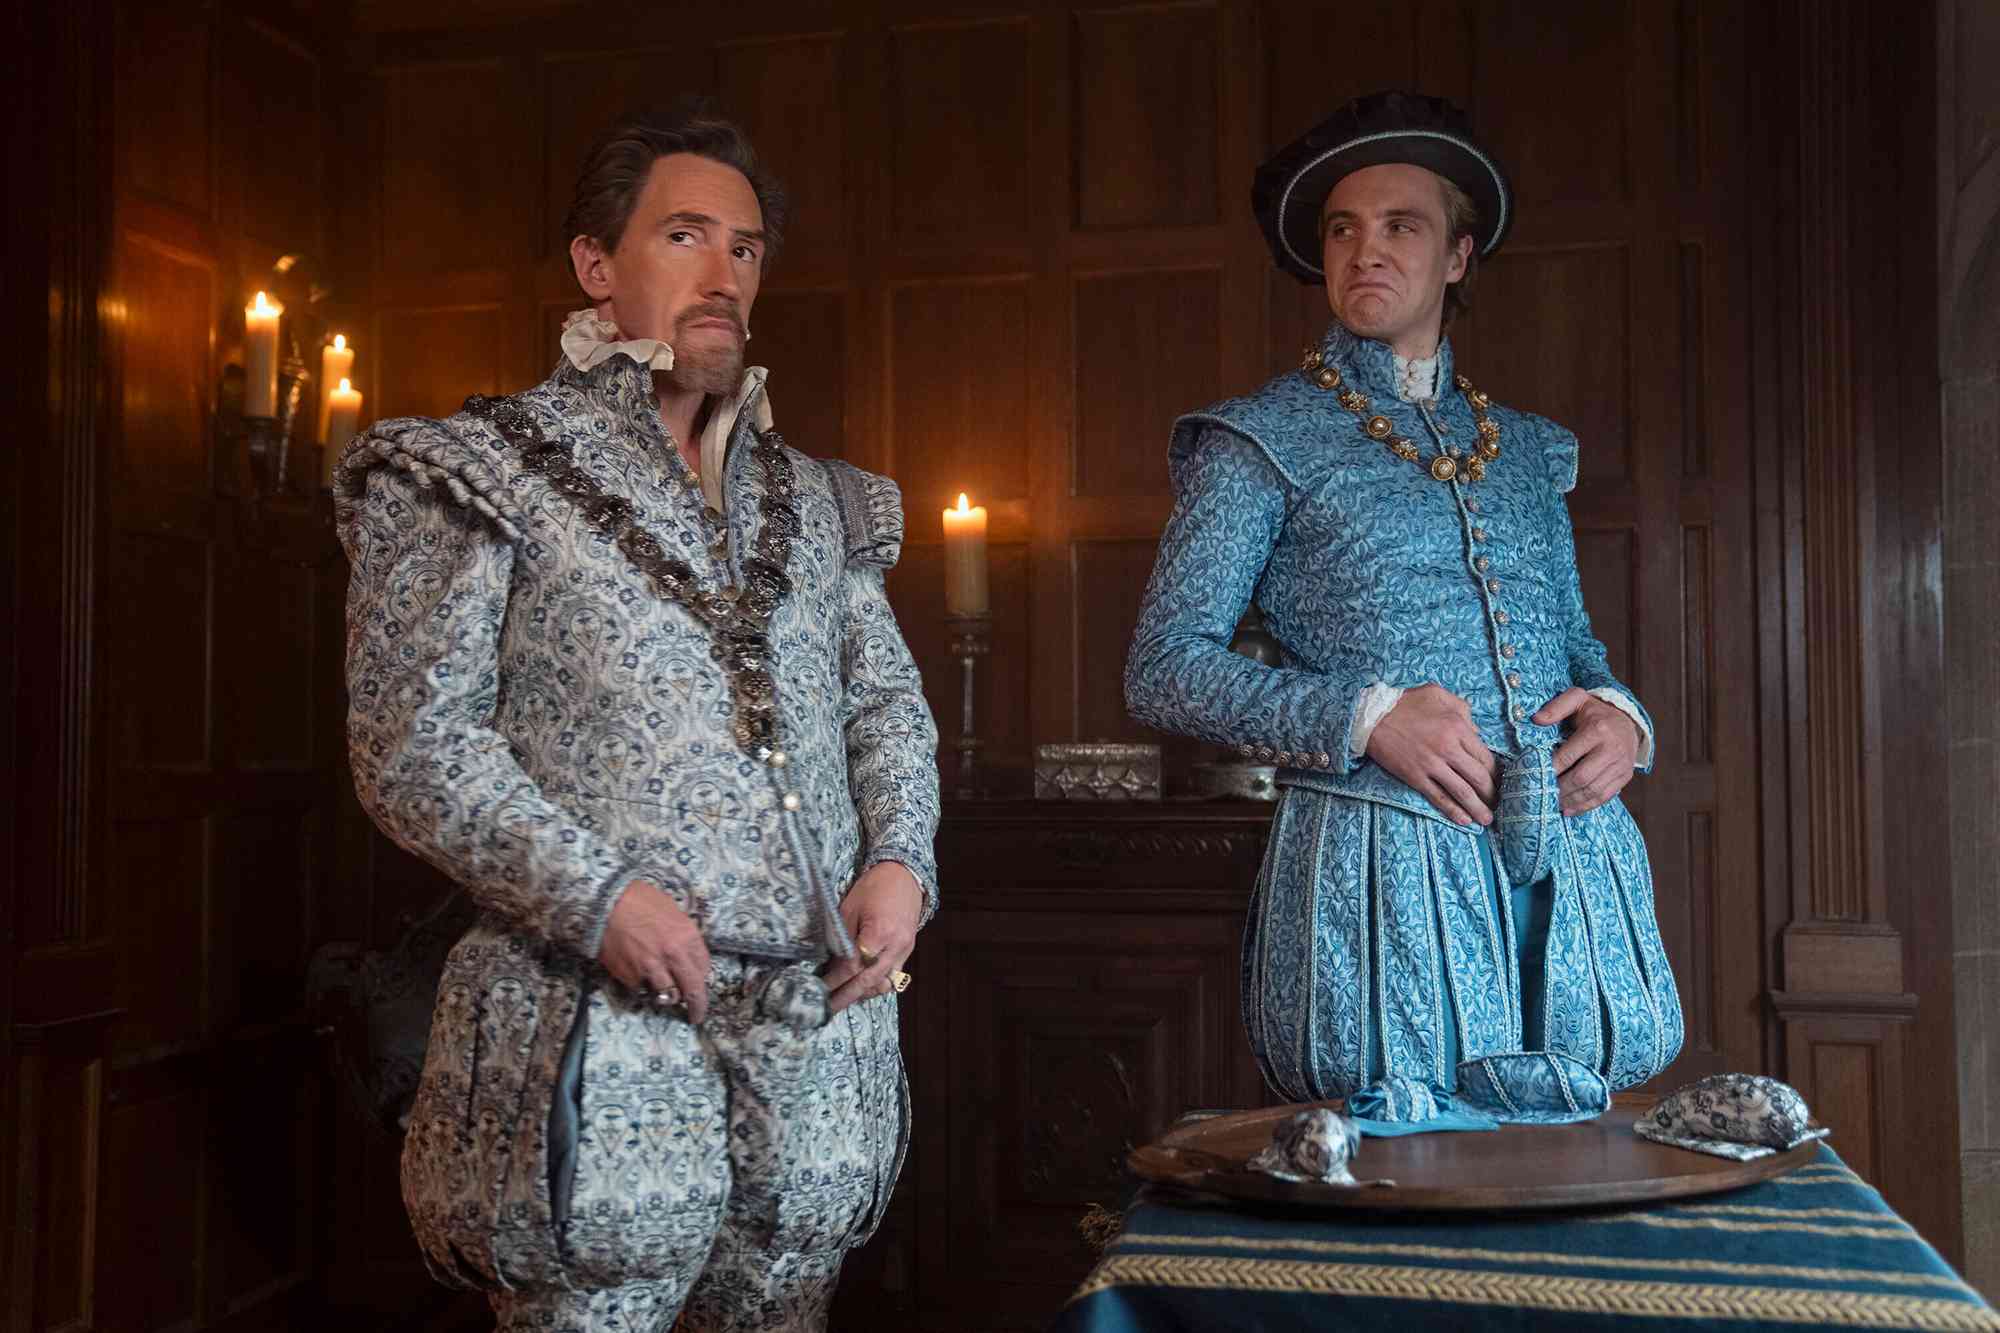 Rob Brydon as Lord Dudley and Henry Ashton as Stan Dudley in 'My Lady Jane'. 